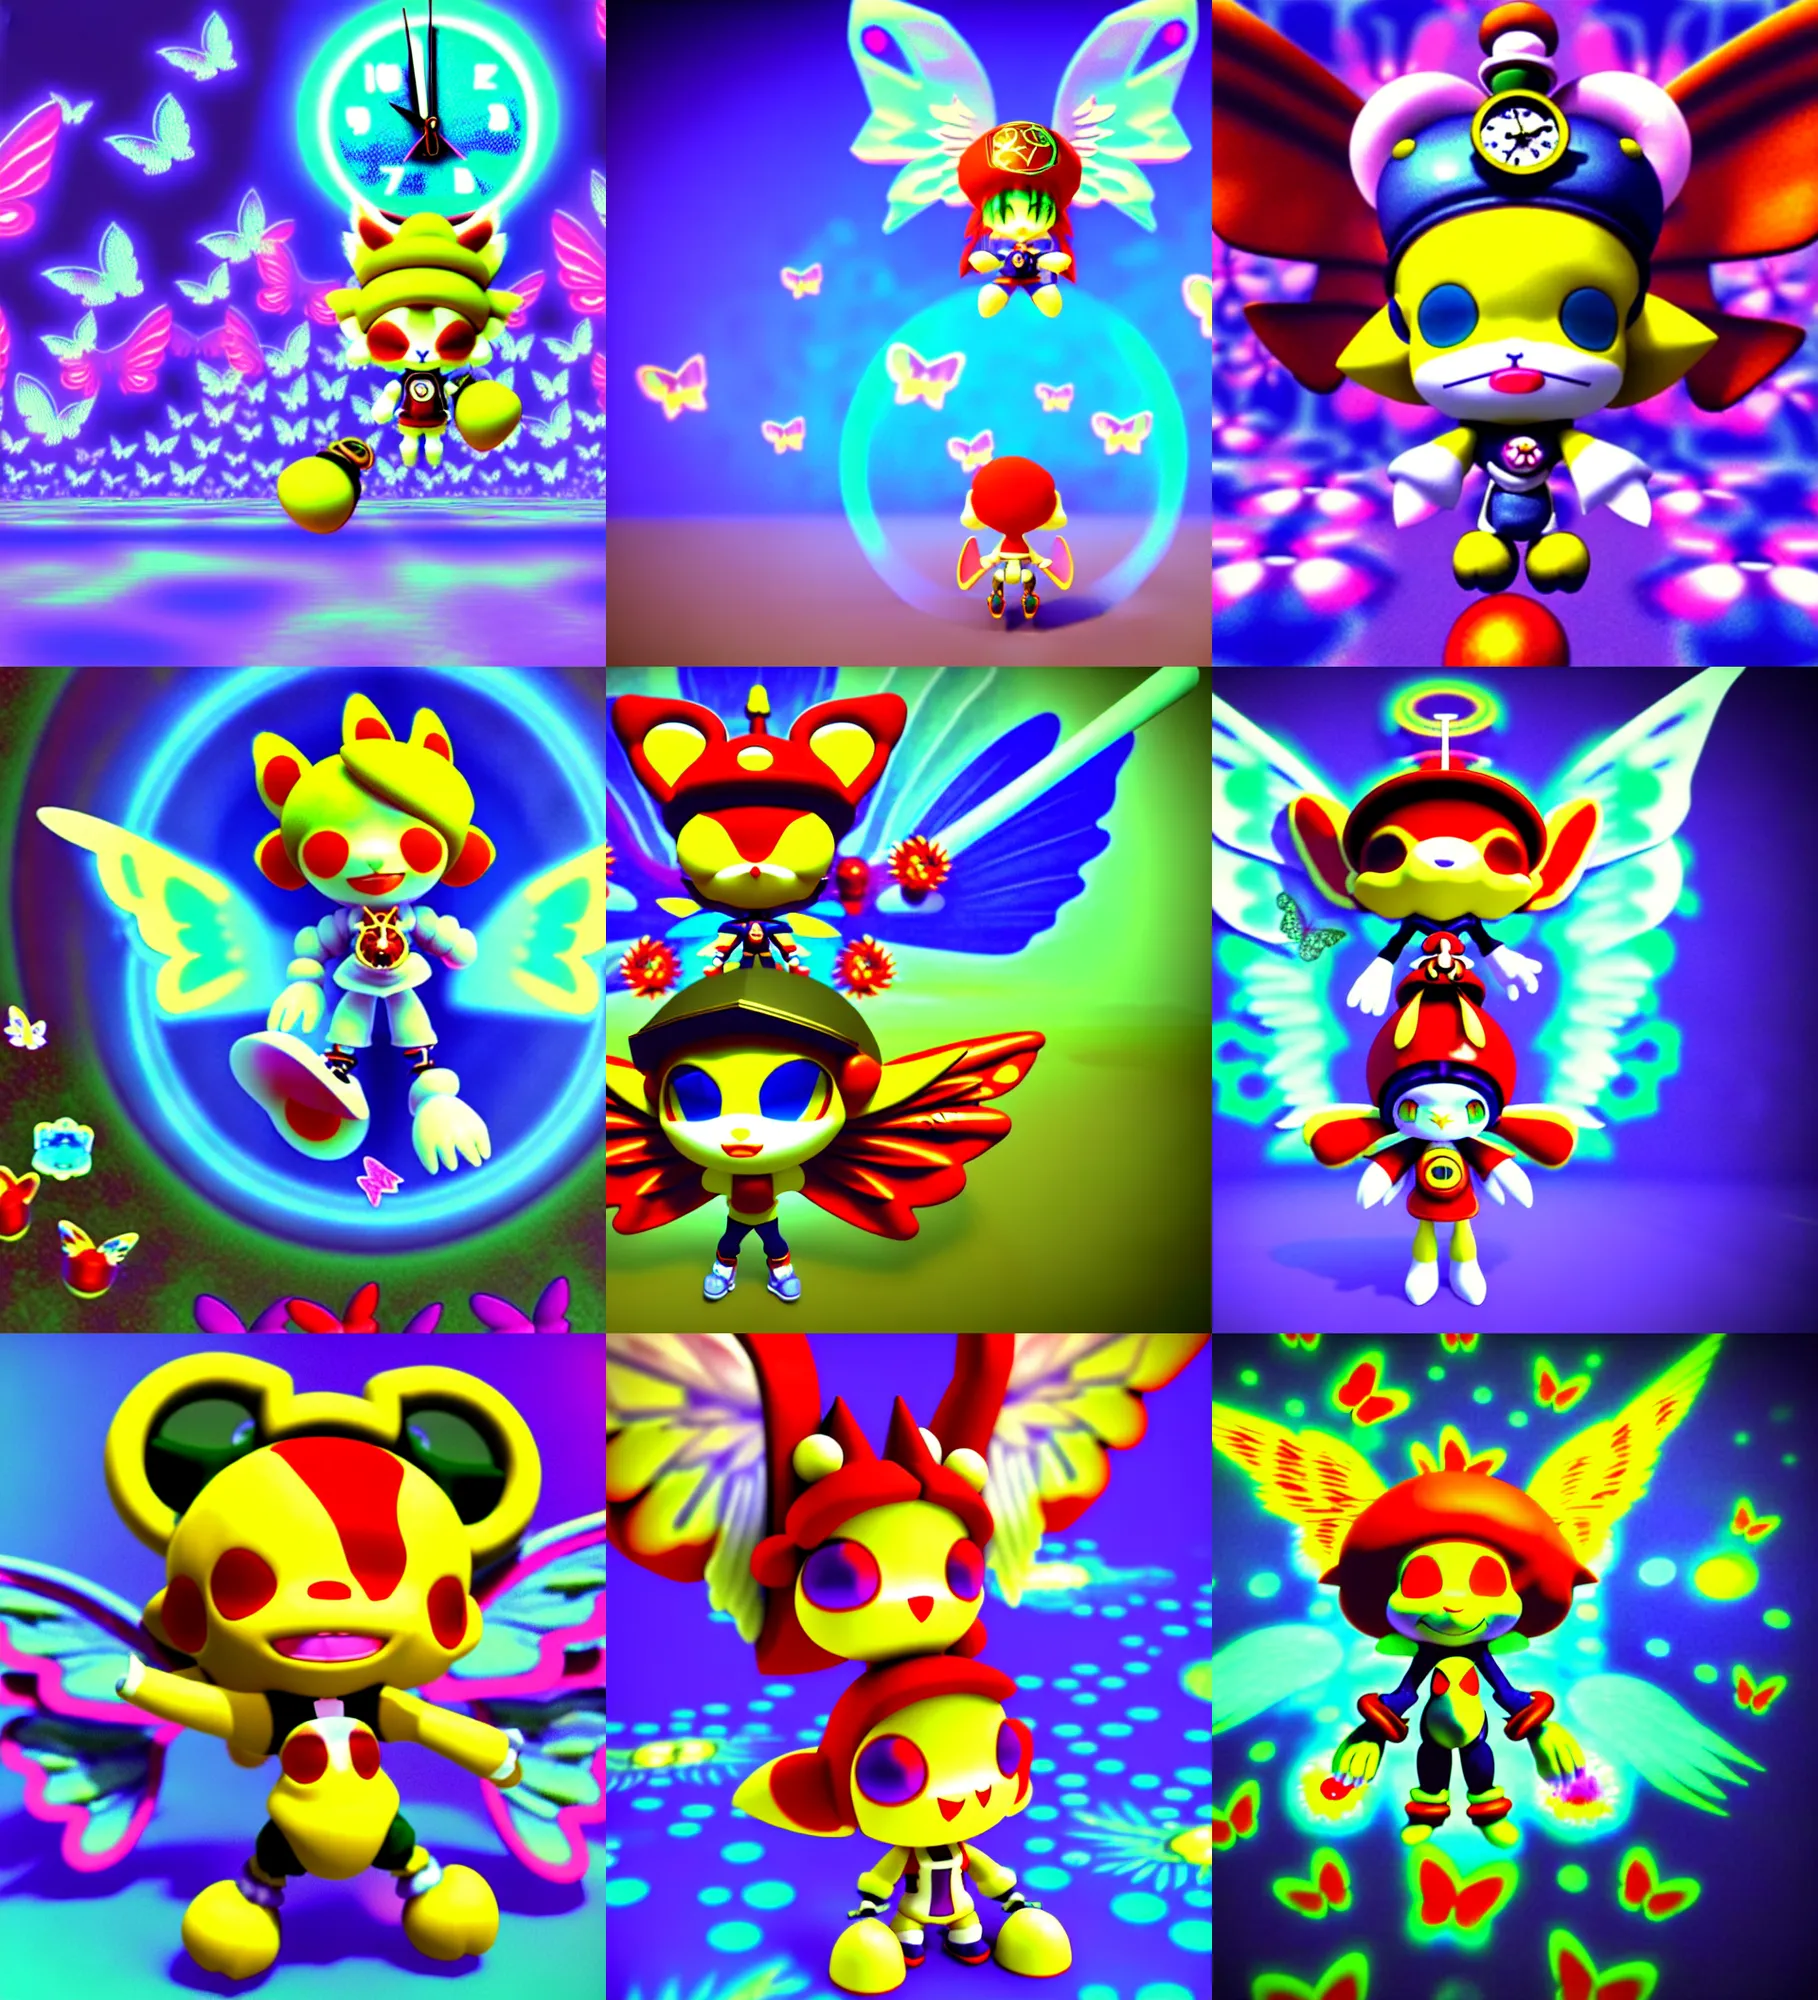 Prompt: 3 d render of chibi clock cyborg klonoa demon with angel wings against a psychedelic surreal background with 3 d butterflies and 3 d flowers n the style of 1 9 9 0's cg graphics lsd dream emulator psx graphics 3 d rendered y 2 k aesthetic by ichiro tanida, 3 do magazine, wide shot